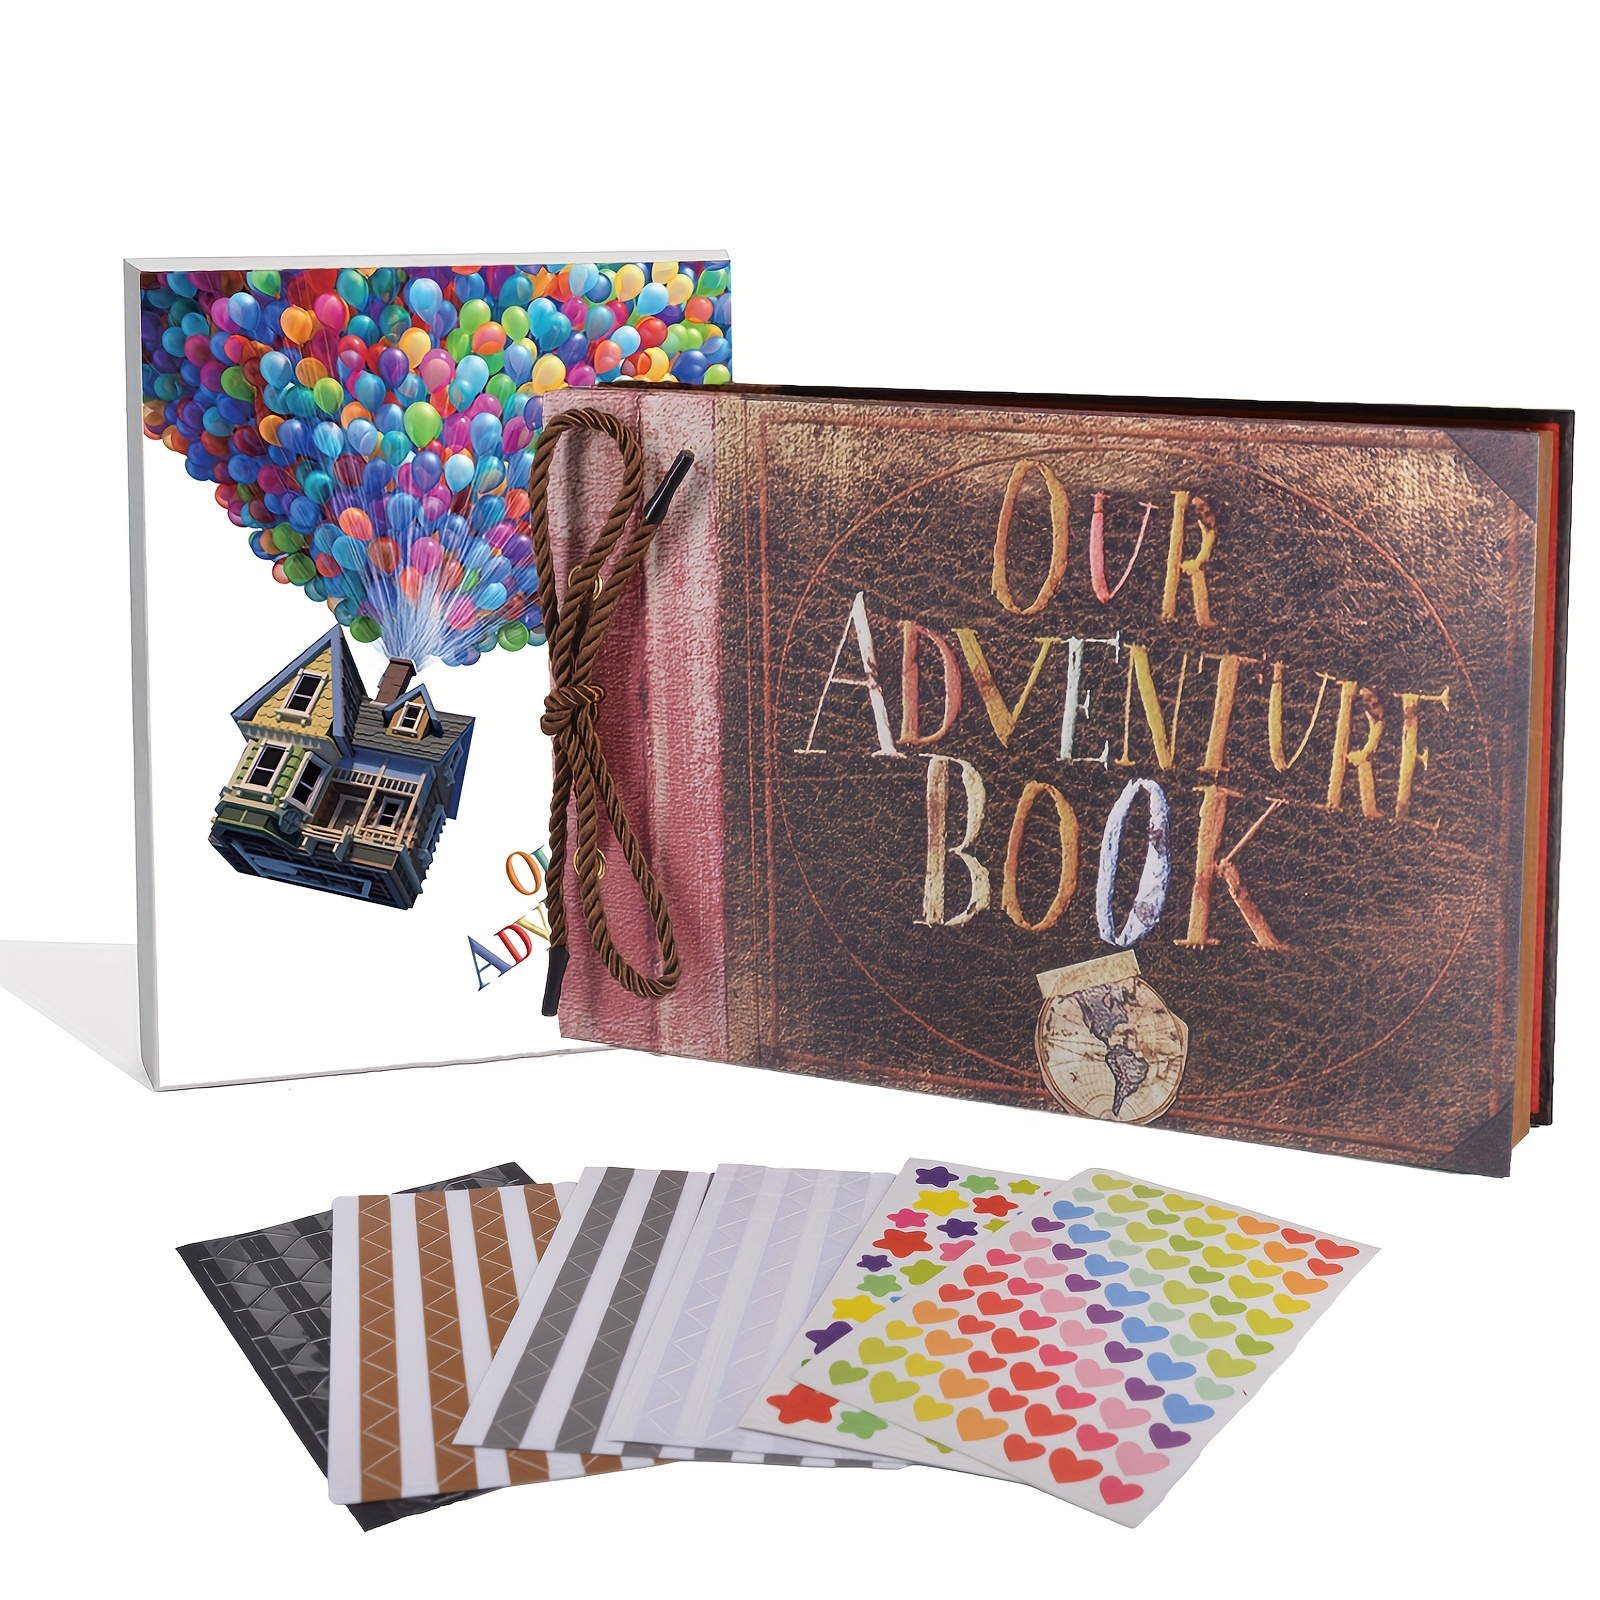 Autograph Book: Signature & Photo Book, Blank Unlined Memory Album Photo,  To Collect Signatures with Selfies or Pictures of Your favorite Characters   of your Trips Memories or Family Vacations: Design, Elegant